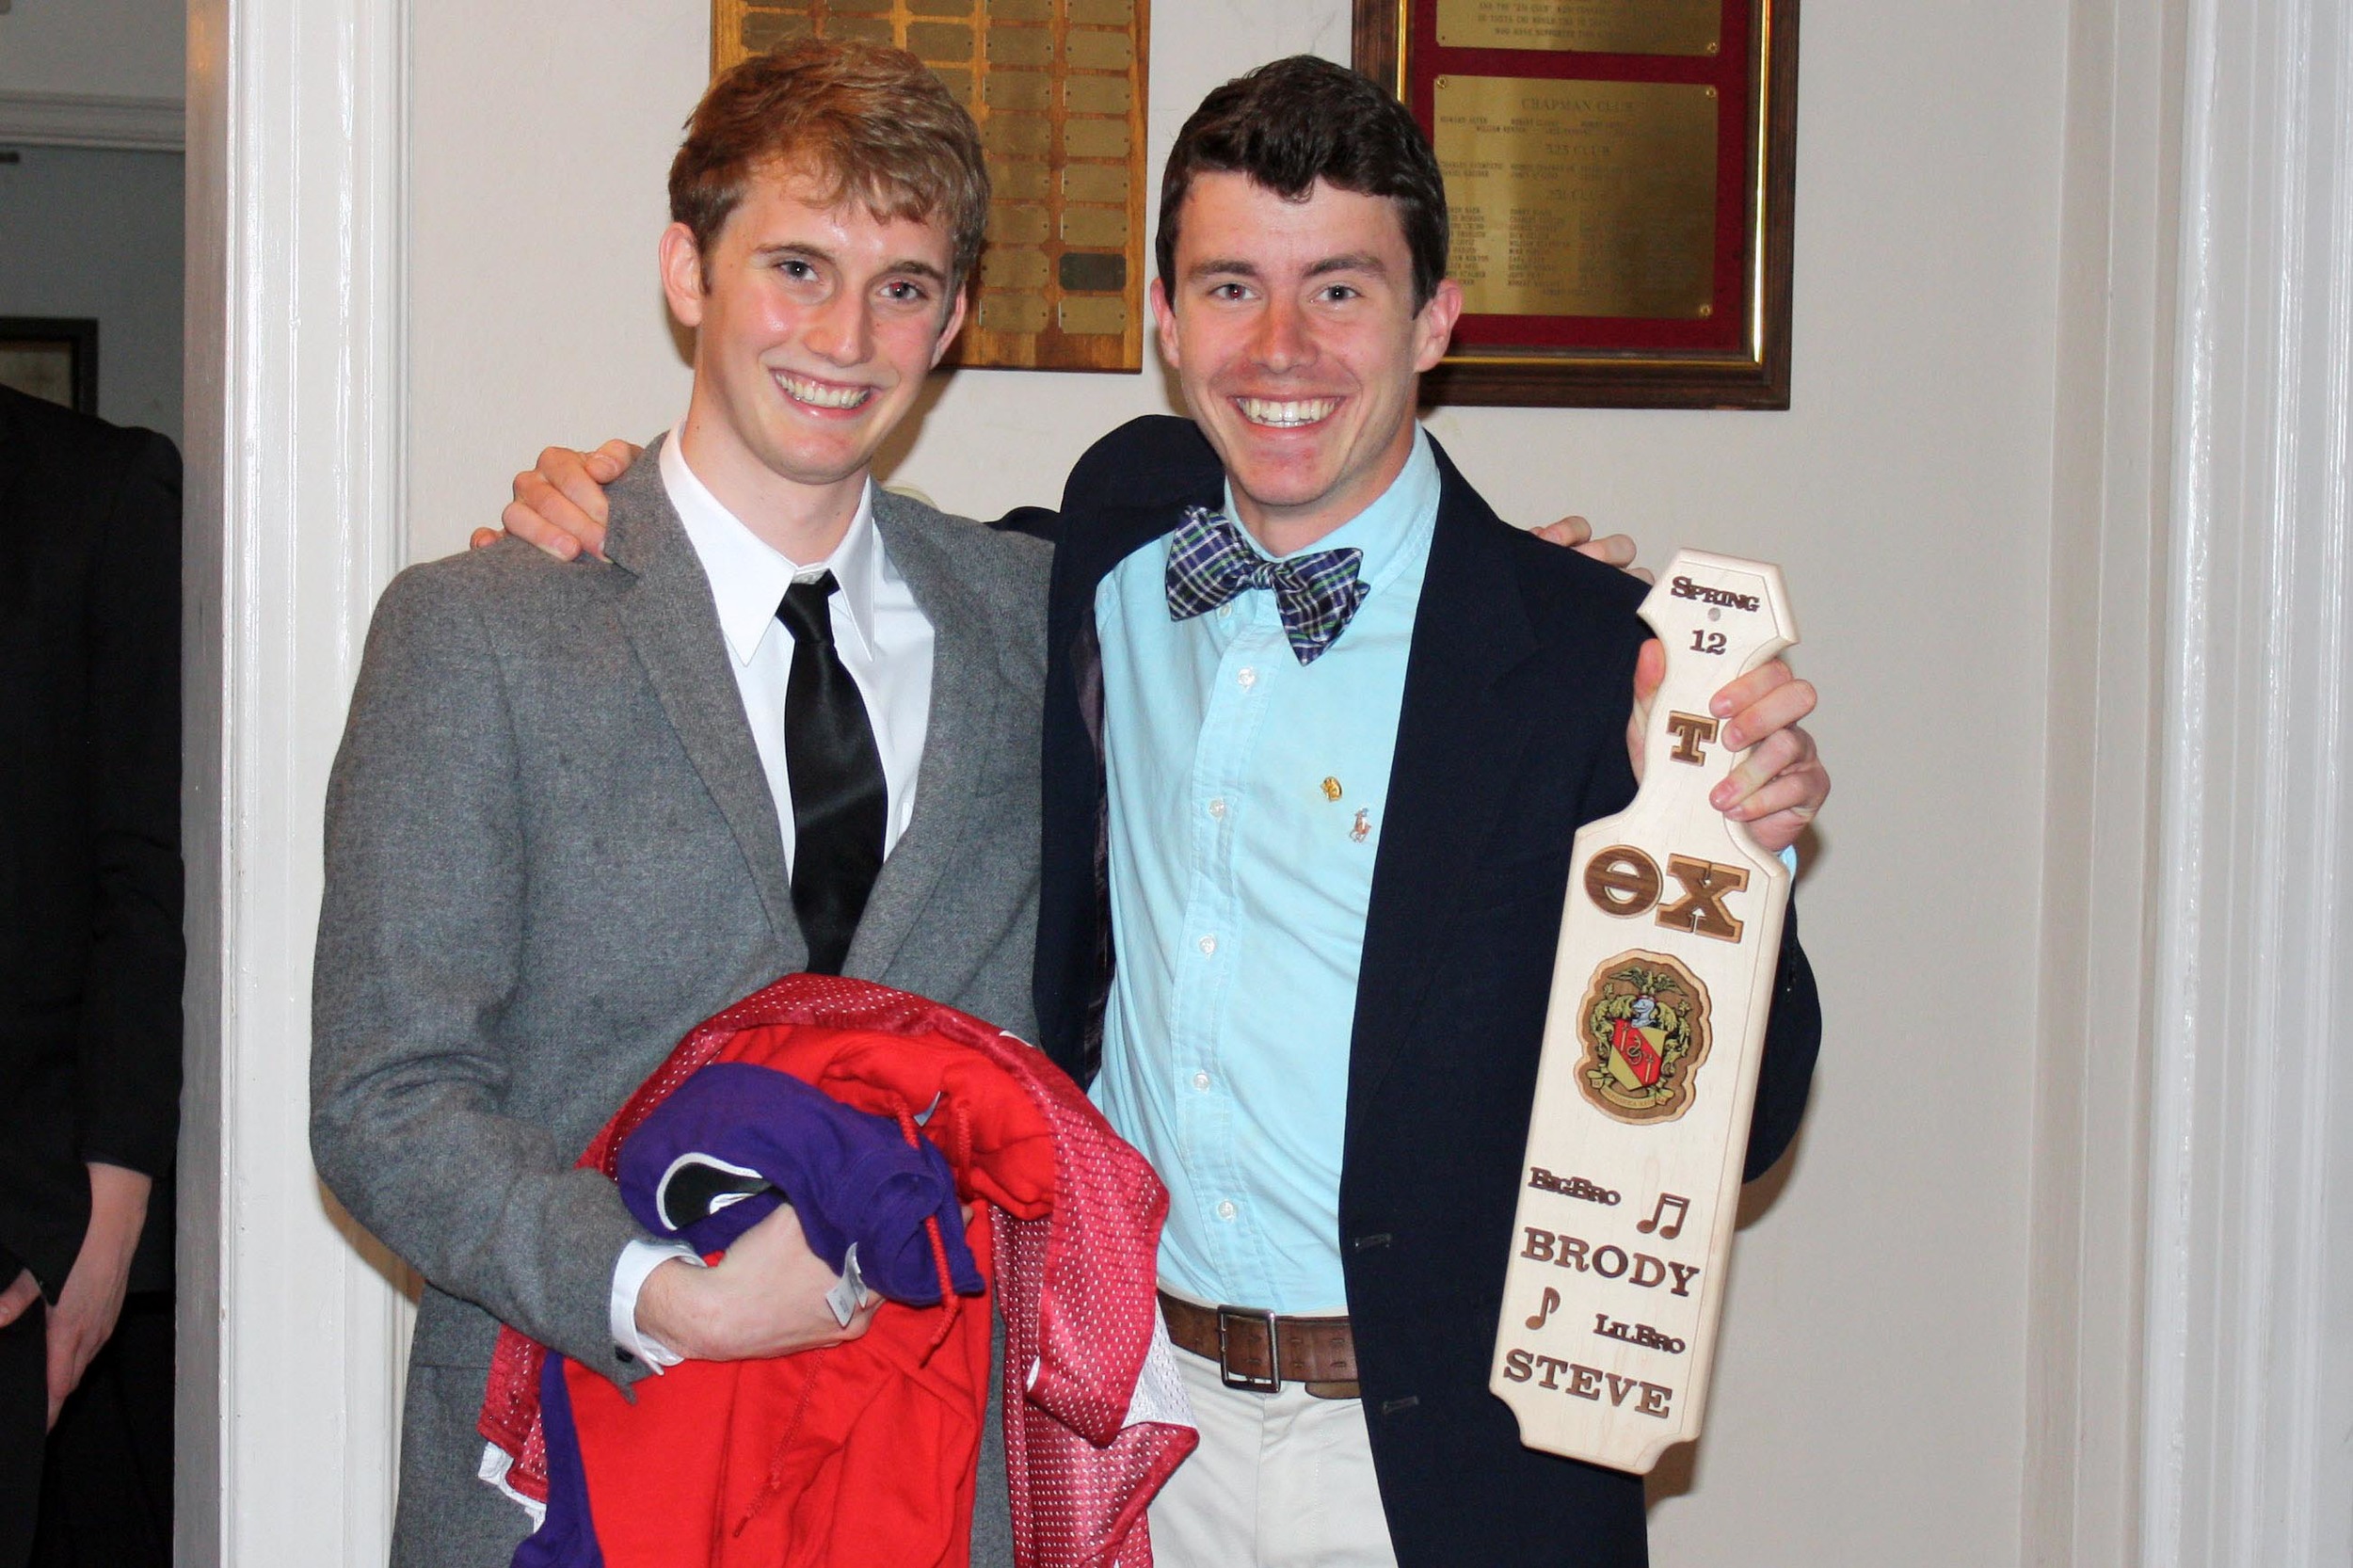  Little Brother Steve Johnson (L) and Big Brother Brody Karn
Spring 2012 Initiation Night 